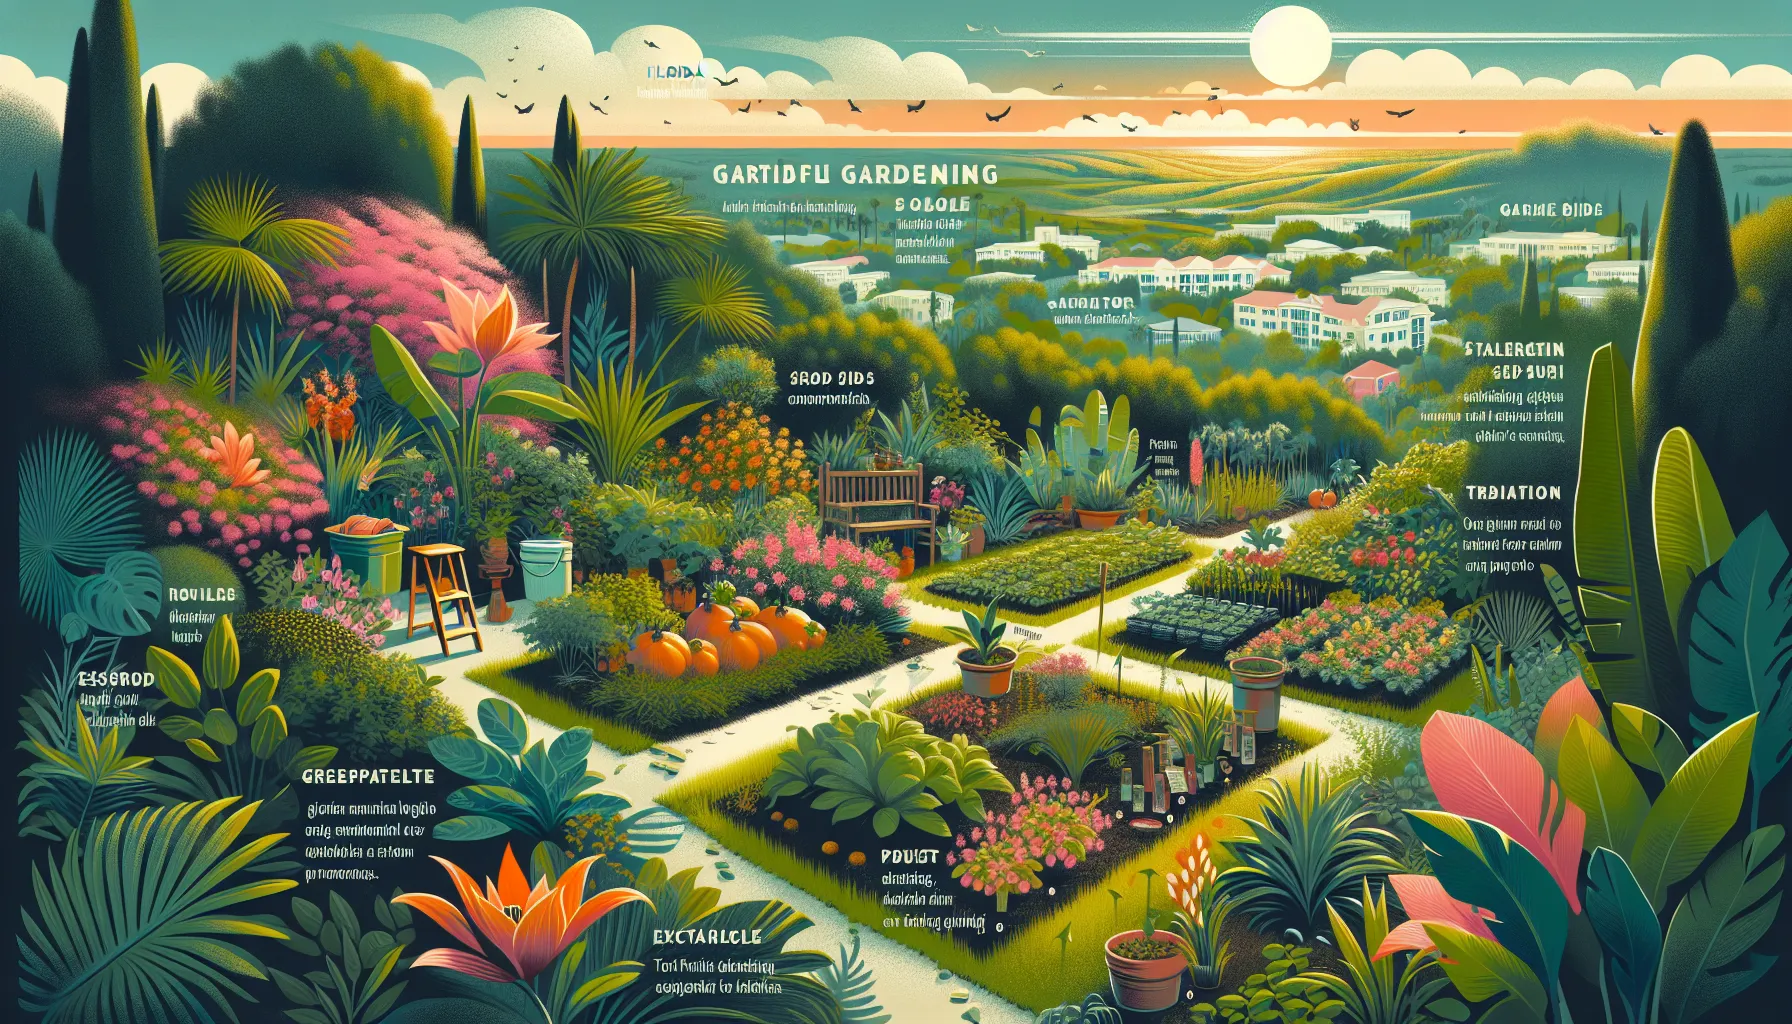 An illustrated panorama showcasing the vibrant and diverse flora and structured garden beds typical of gardening in Florida.